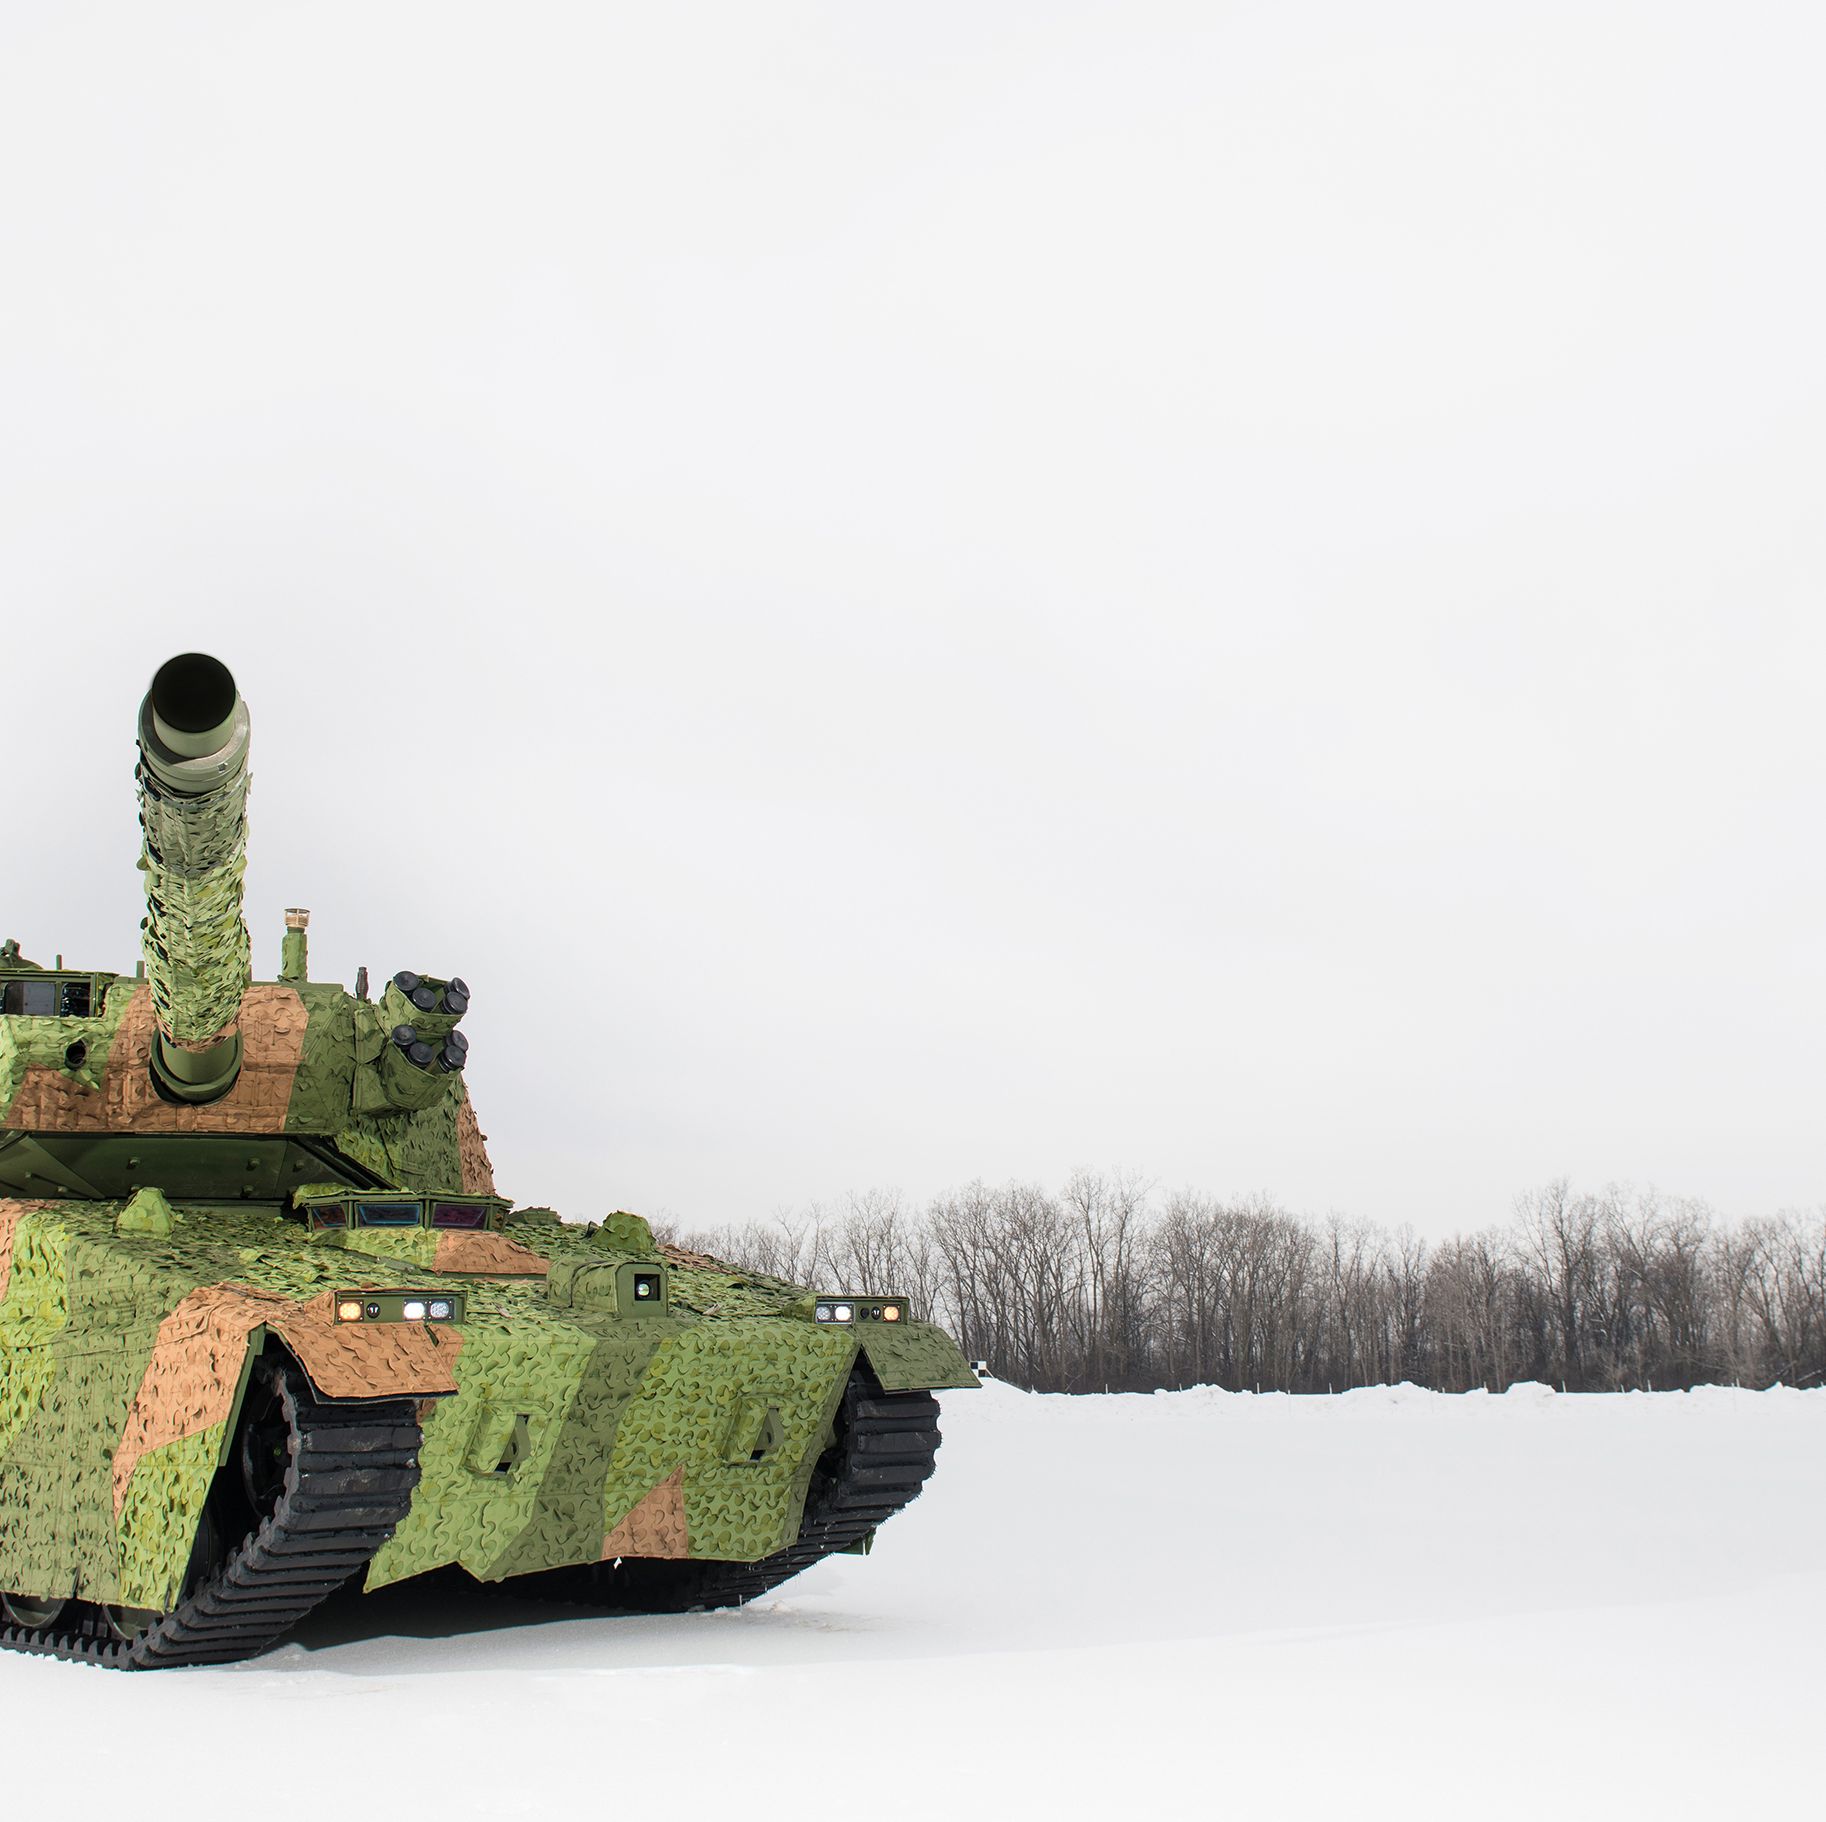 Two Light Tank Prototypes Battle for the Future of Army Firepower